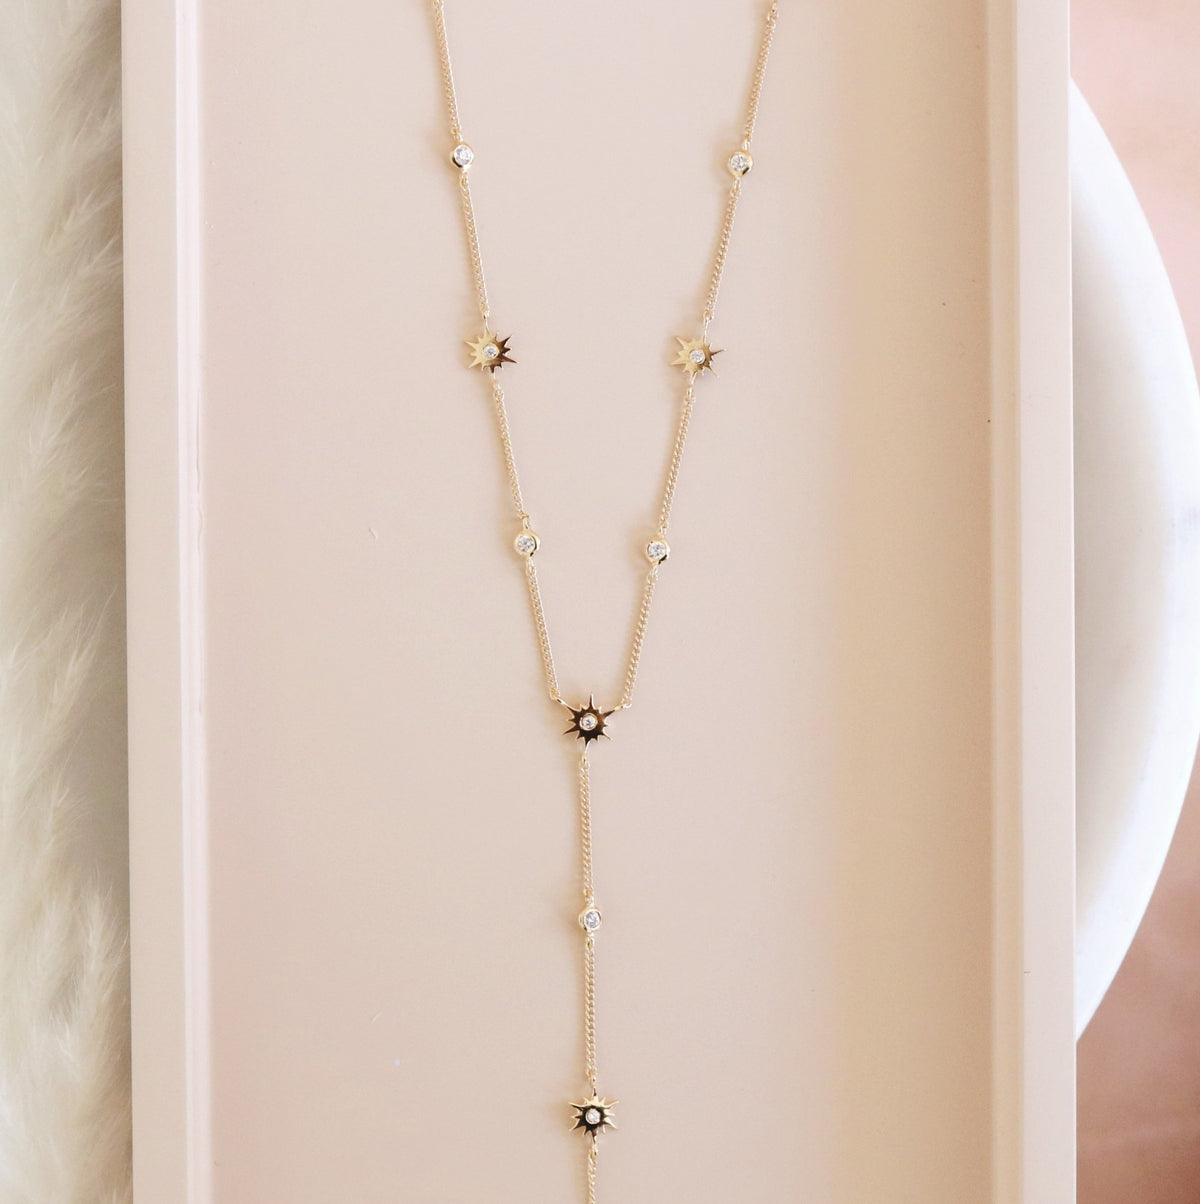 TINY BELIEVE Y NECKLACE - CUBIC ZIRCONIA &amp; GOLD - SO PRETTY CARA COTTER